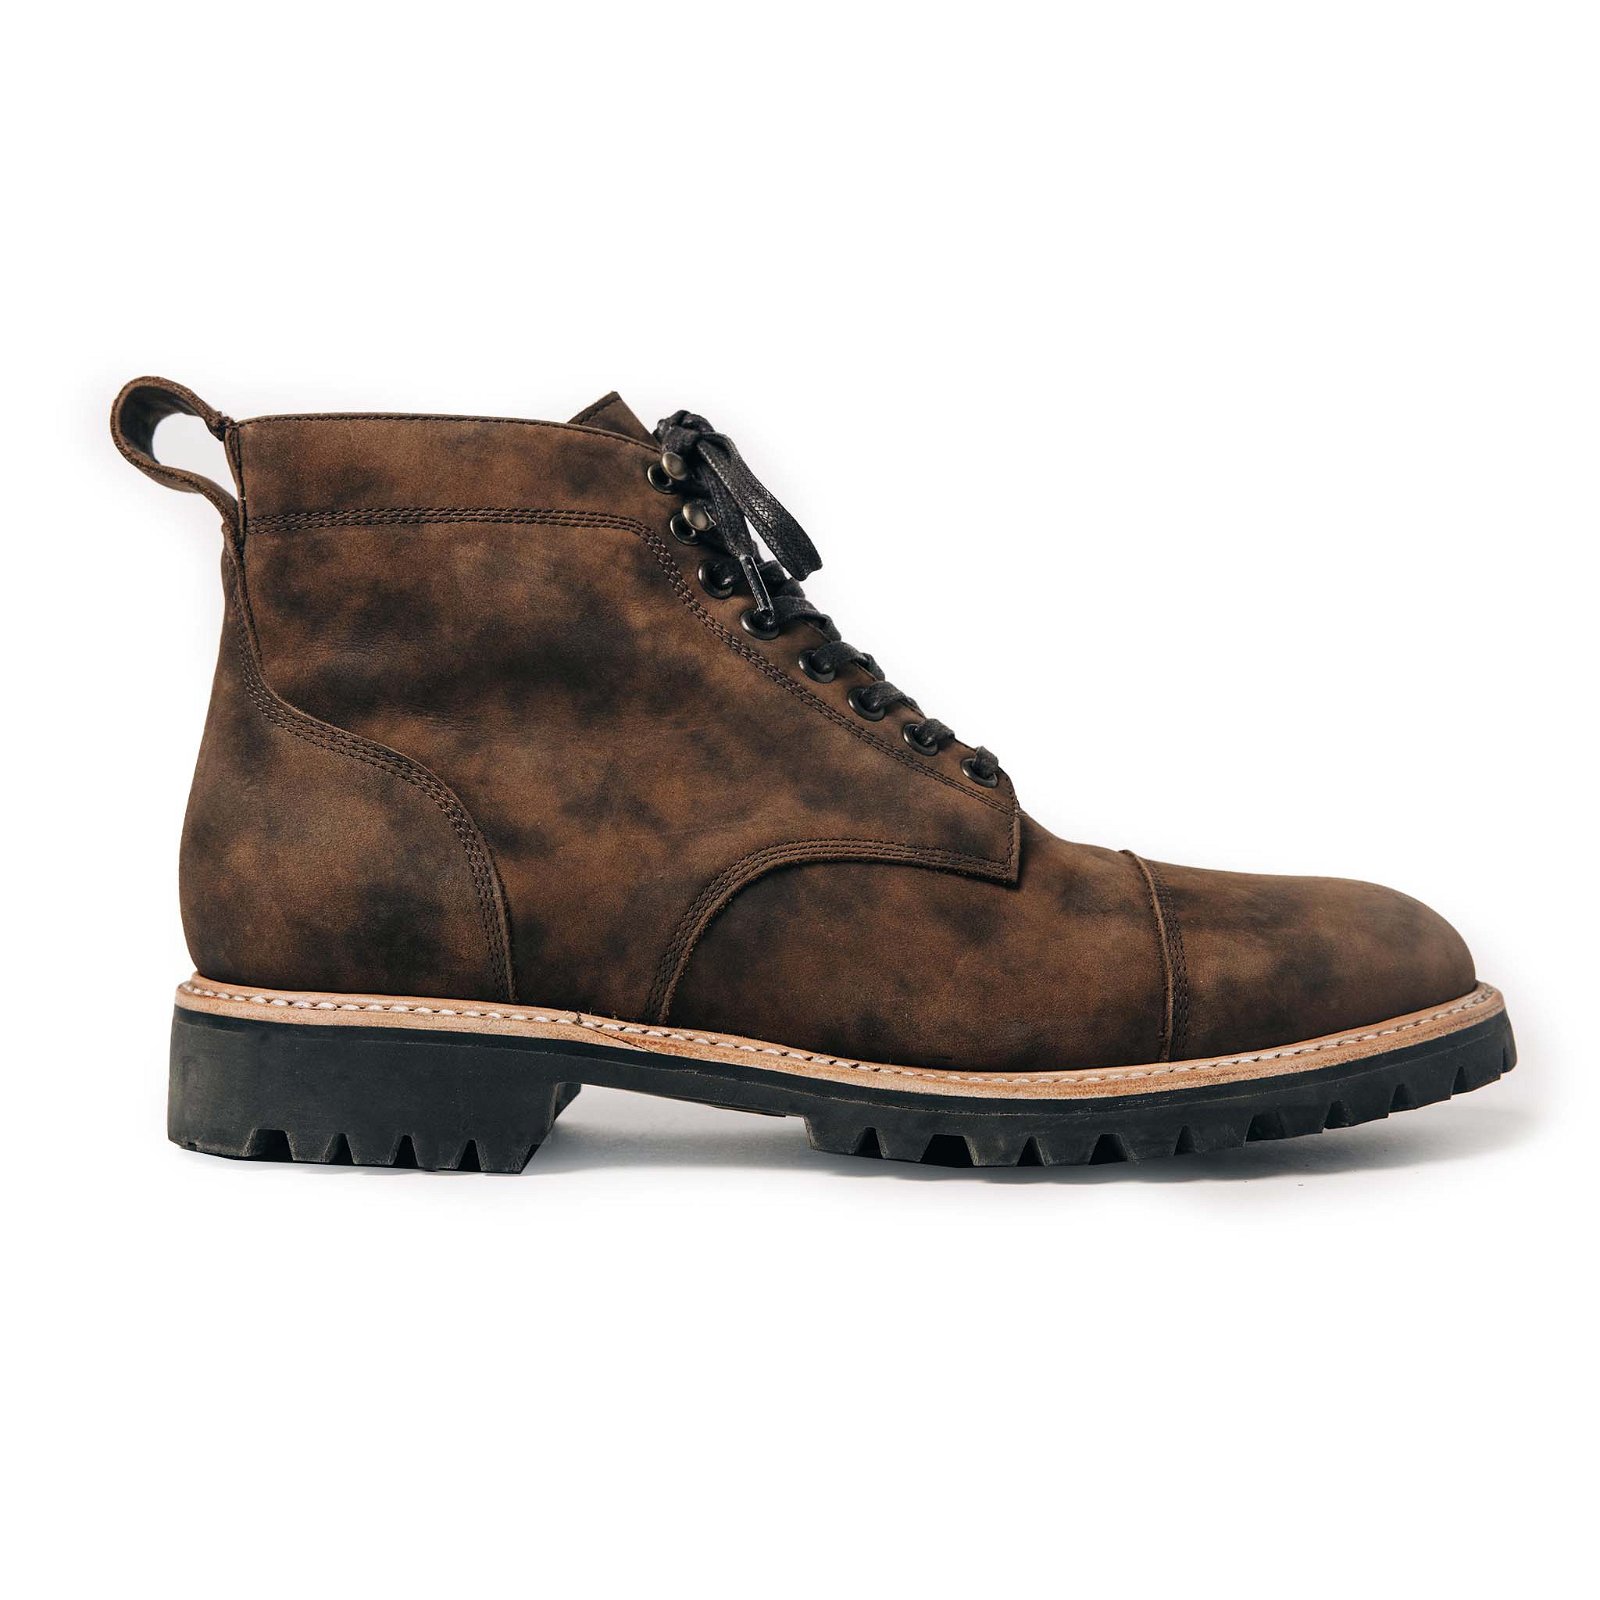 Image of The Moto Boot in Espresso Grizzly